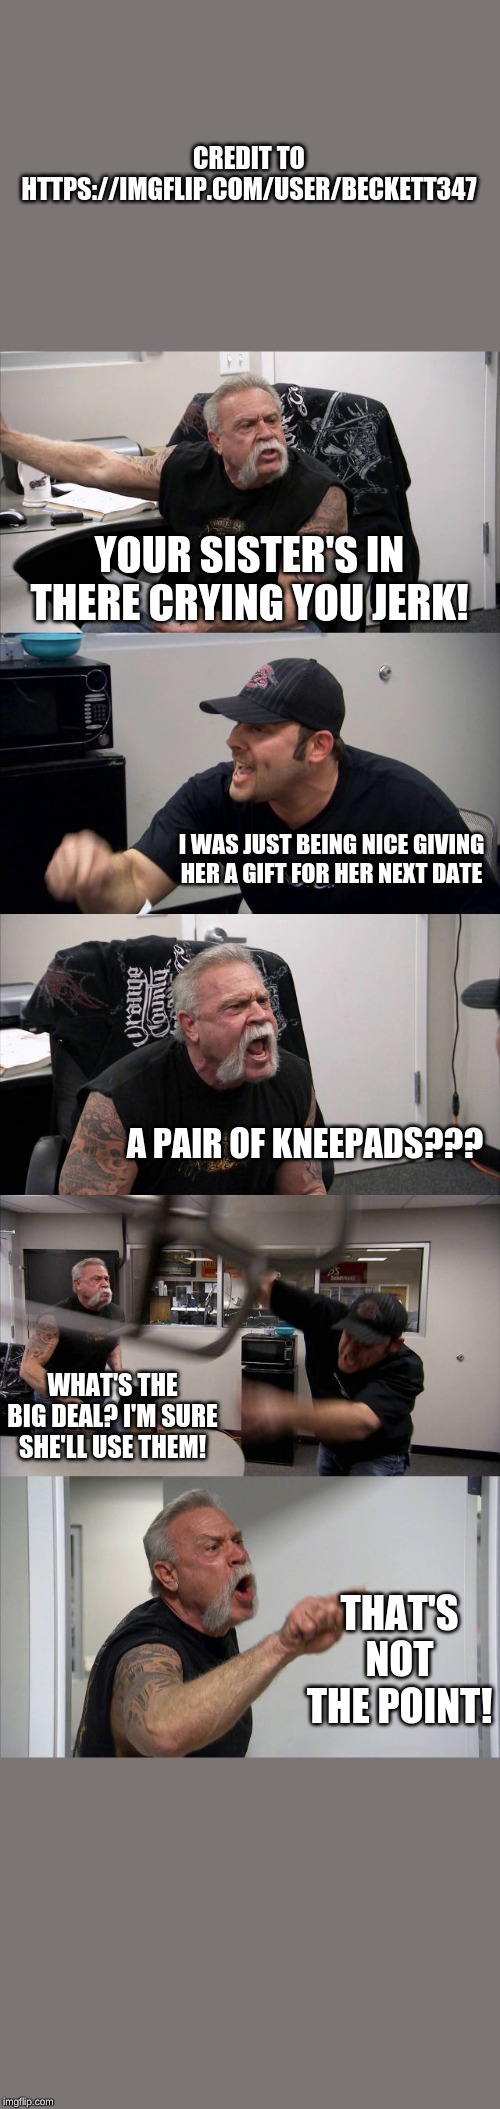 American Chopper Argument Meme | CREDIT TO HTTPS://IMGFLIP.COM/USER/BECKETT347; YOUR SISTER'S IN THERE CRYING YOU JERK! I WAS JUST BEING NICE GIVING HER A GIFT FOR HER NEXT DATE; A PAIR OF KNEEPADS??? WHAT'S THE BIG DEAL? I'M SURE SHE'LL USE THEM! THAT'S NOT THE POINT! | image tagged in memes,american chopper argument | made w/ Imgflip meme maker